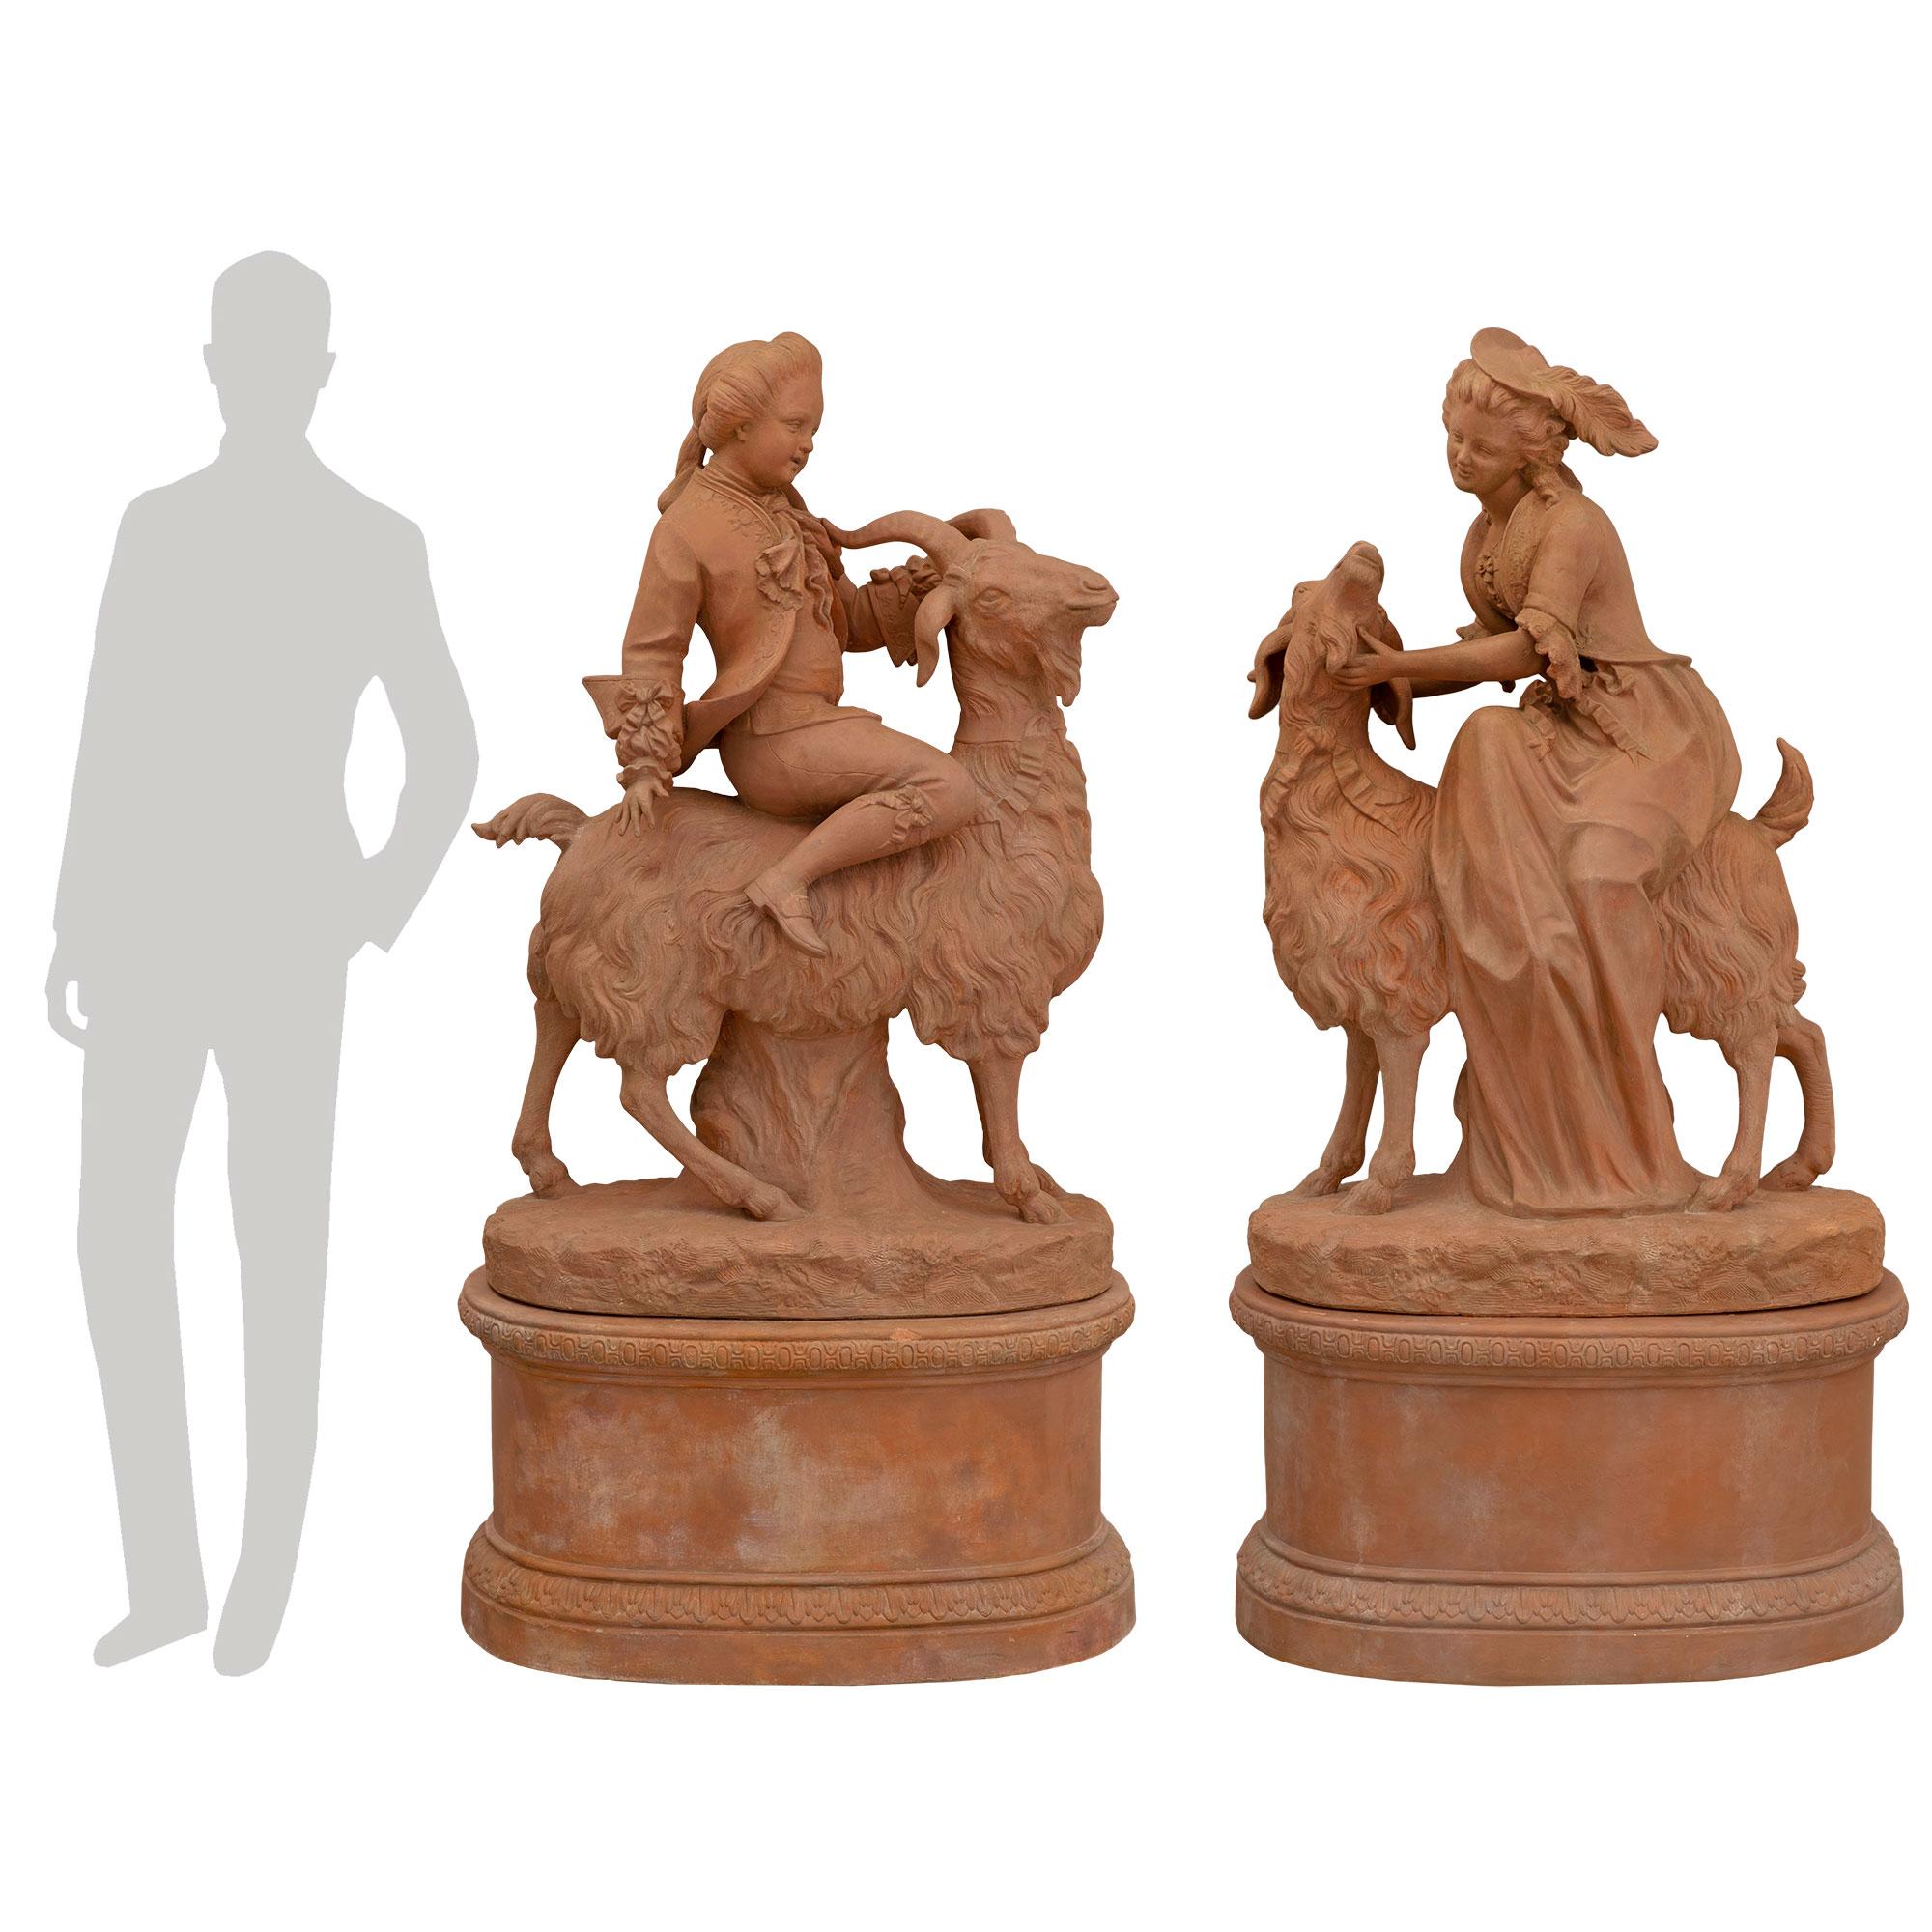 A sensational and extremely decorative pair of French 19th century Terra Cotta statues. Each statue is raised by oblong-shaped bases with fine mottled bands decorated with lovely foliate wrap-around bands. Above are the beautiful and wonderfully